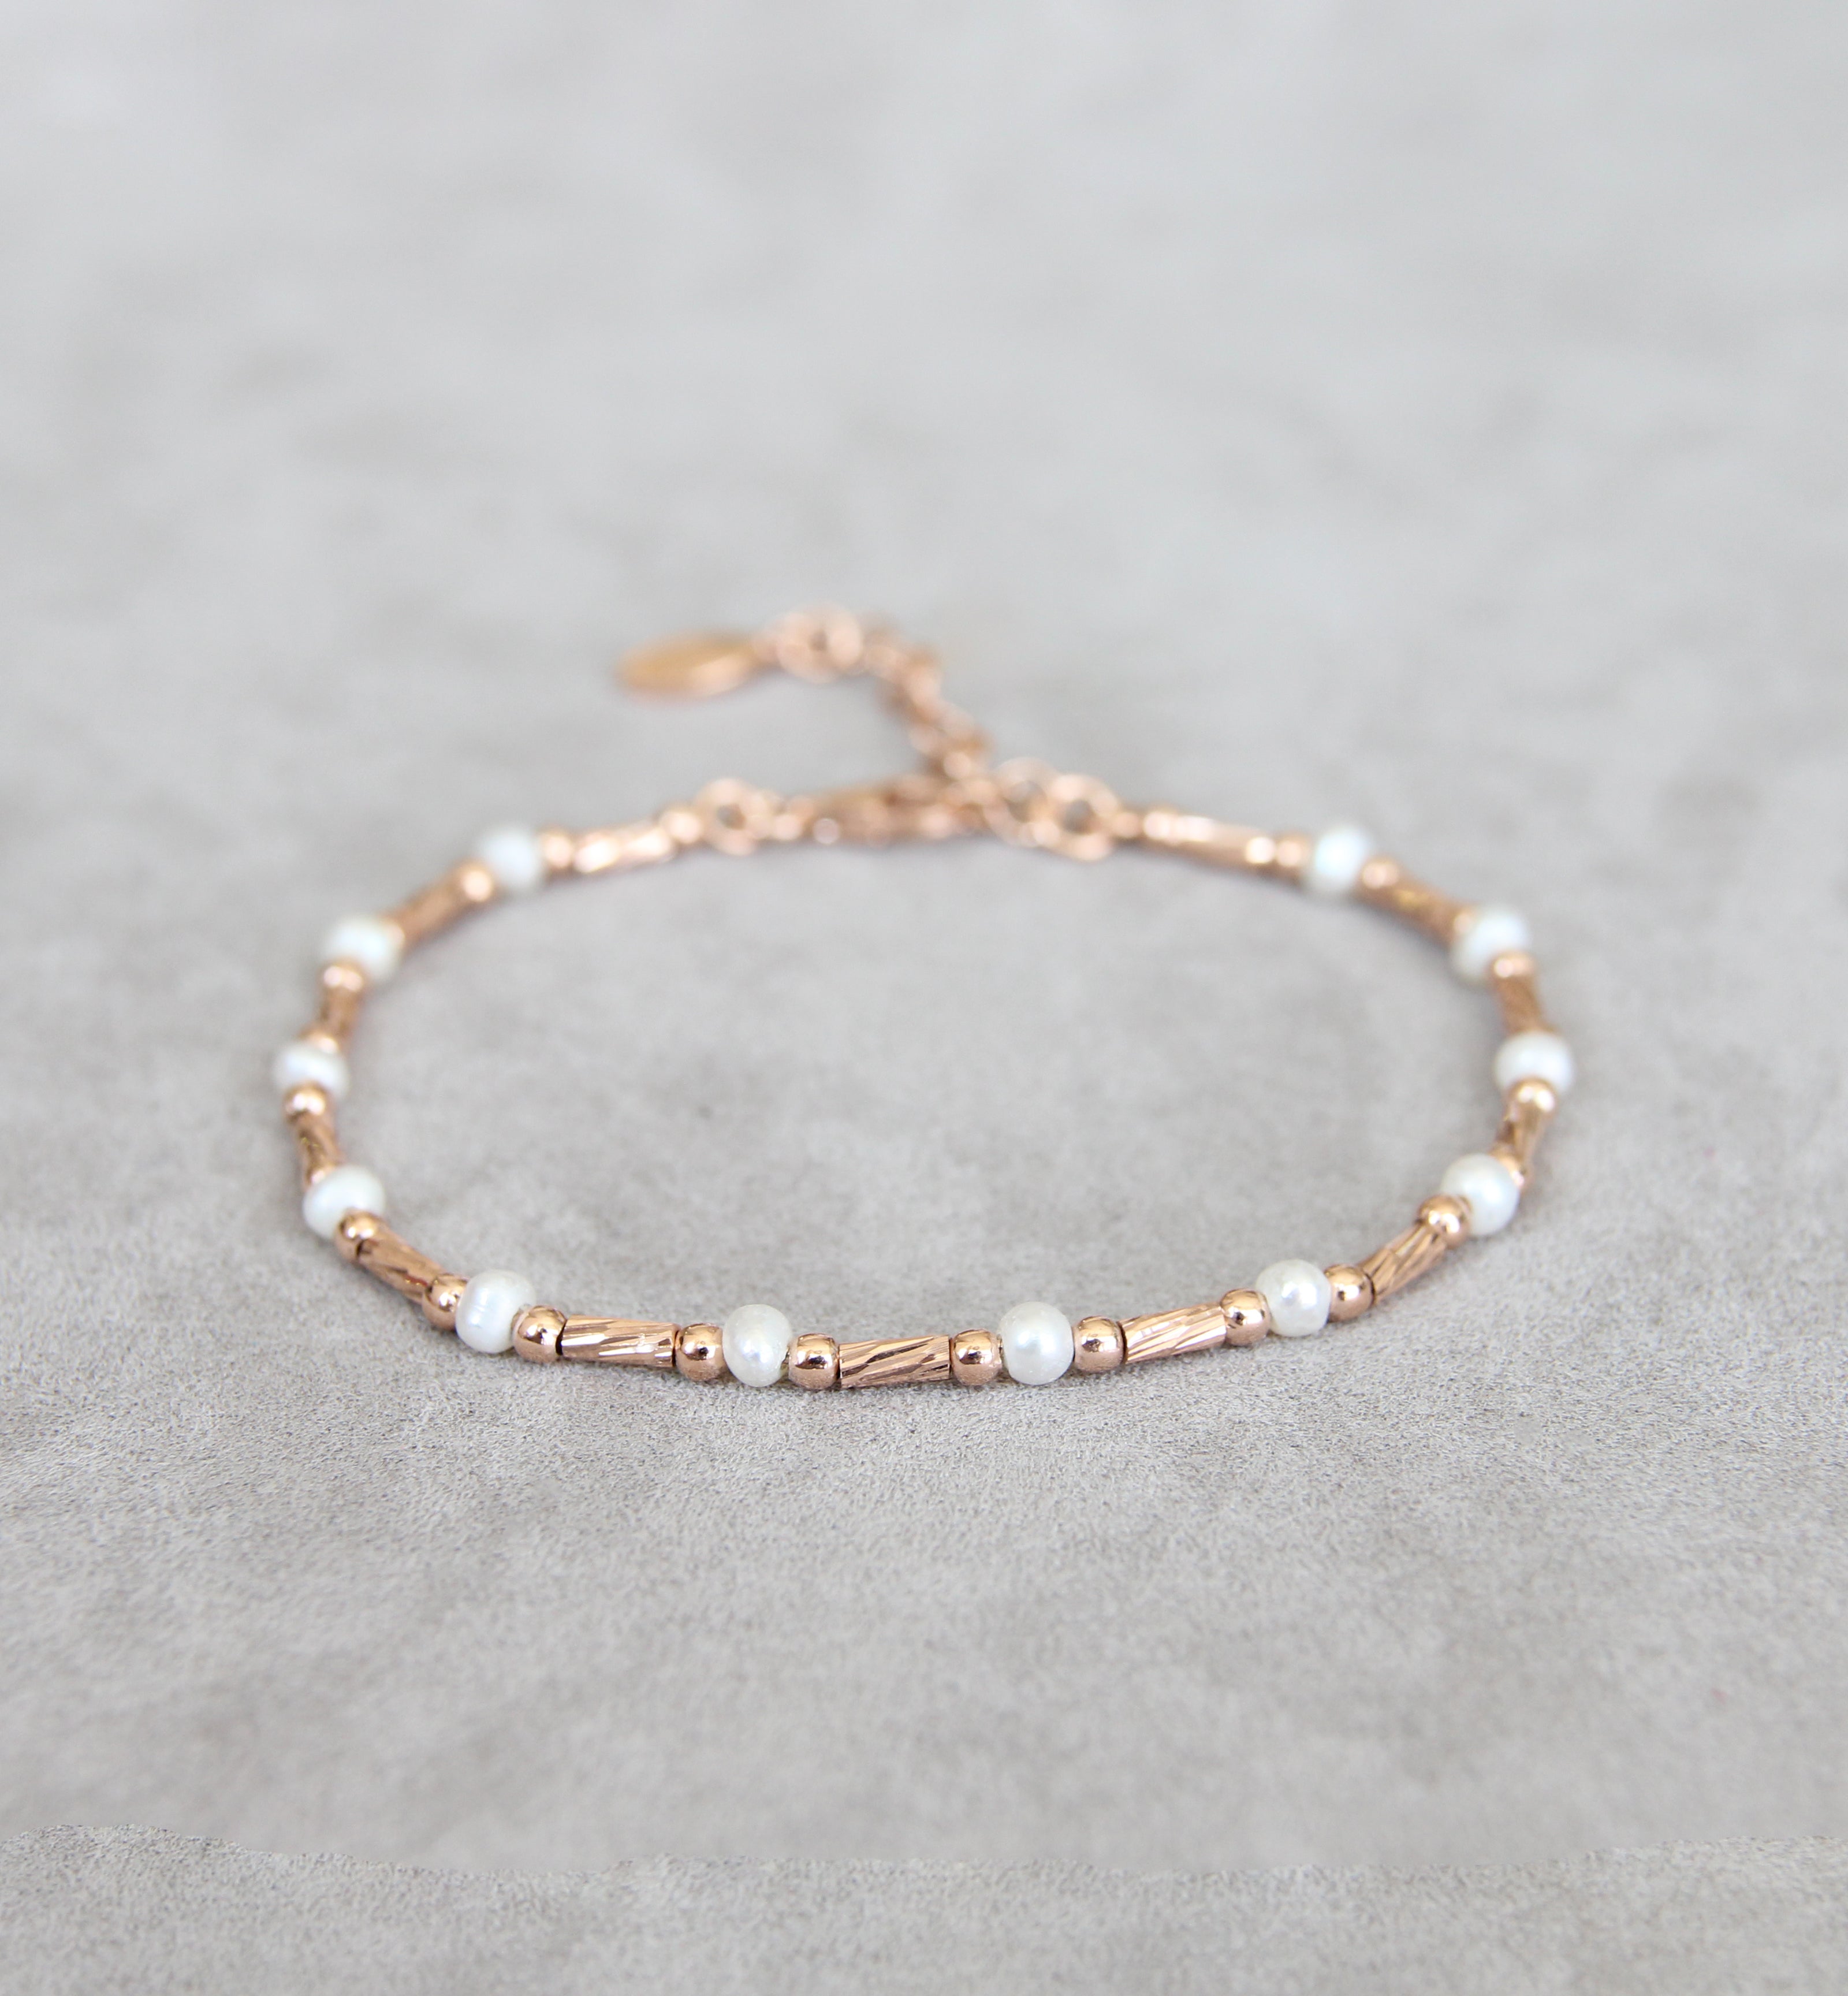 Silver 925 Bracelet with Cultured Pearls